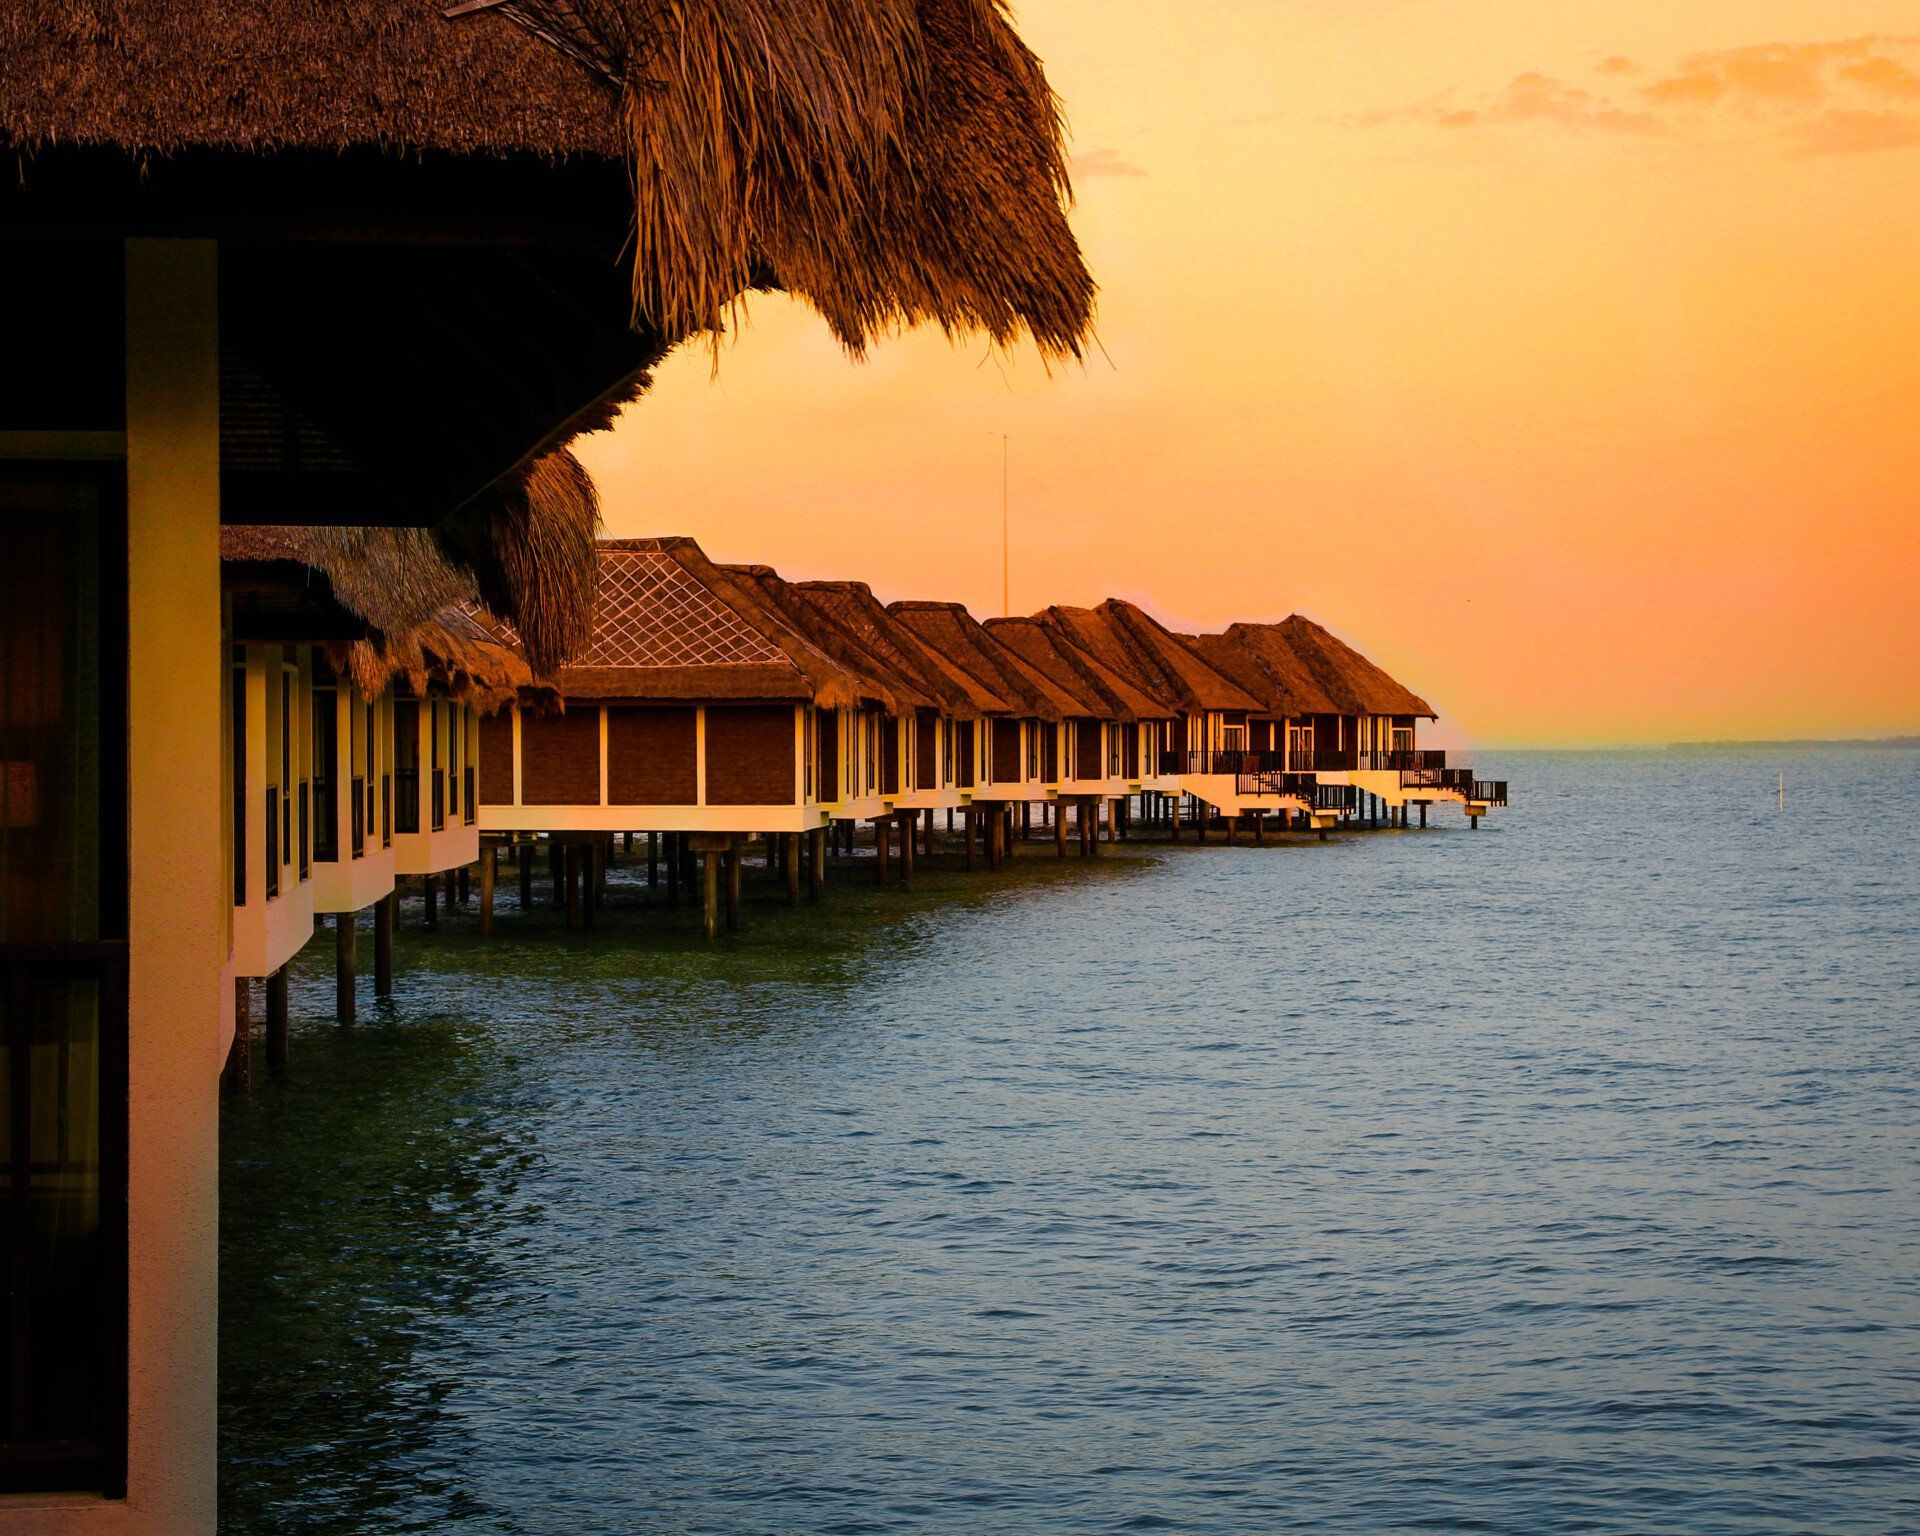 A row of huts on stilts overlooking the ocean at sunset